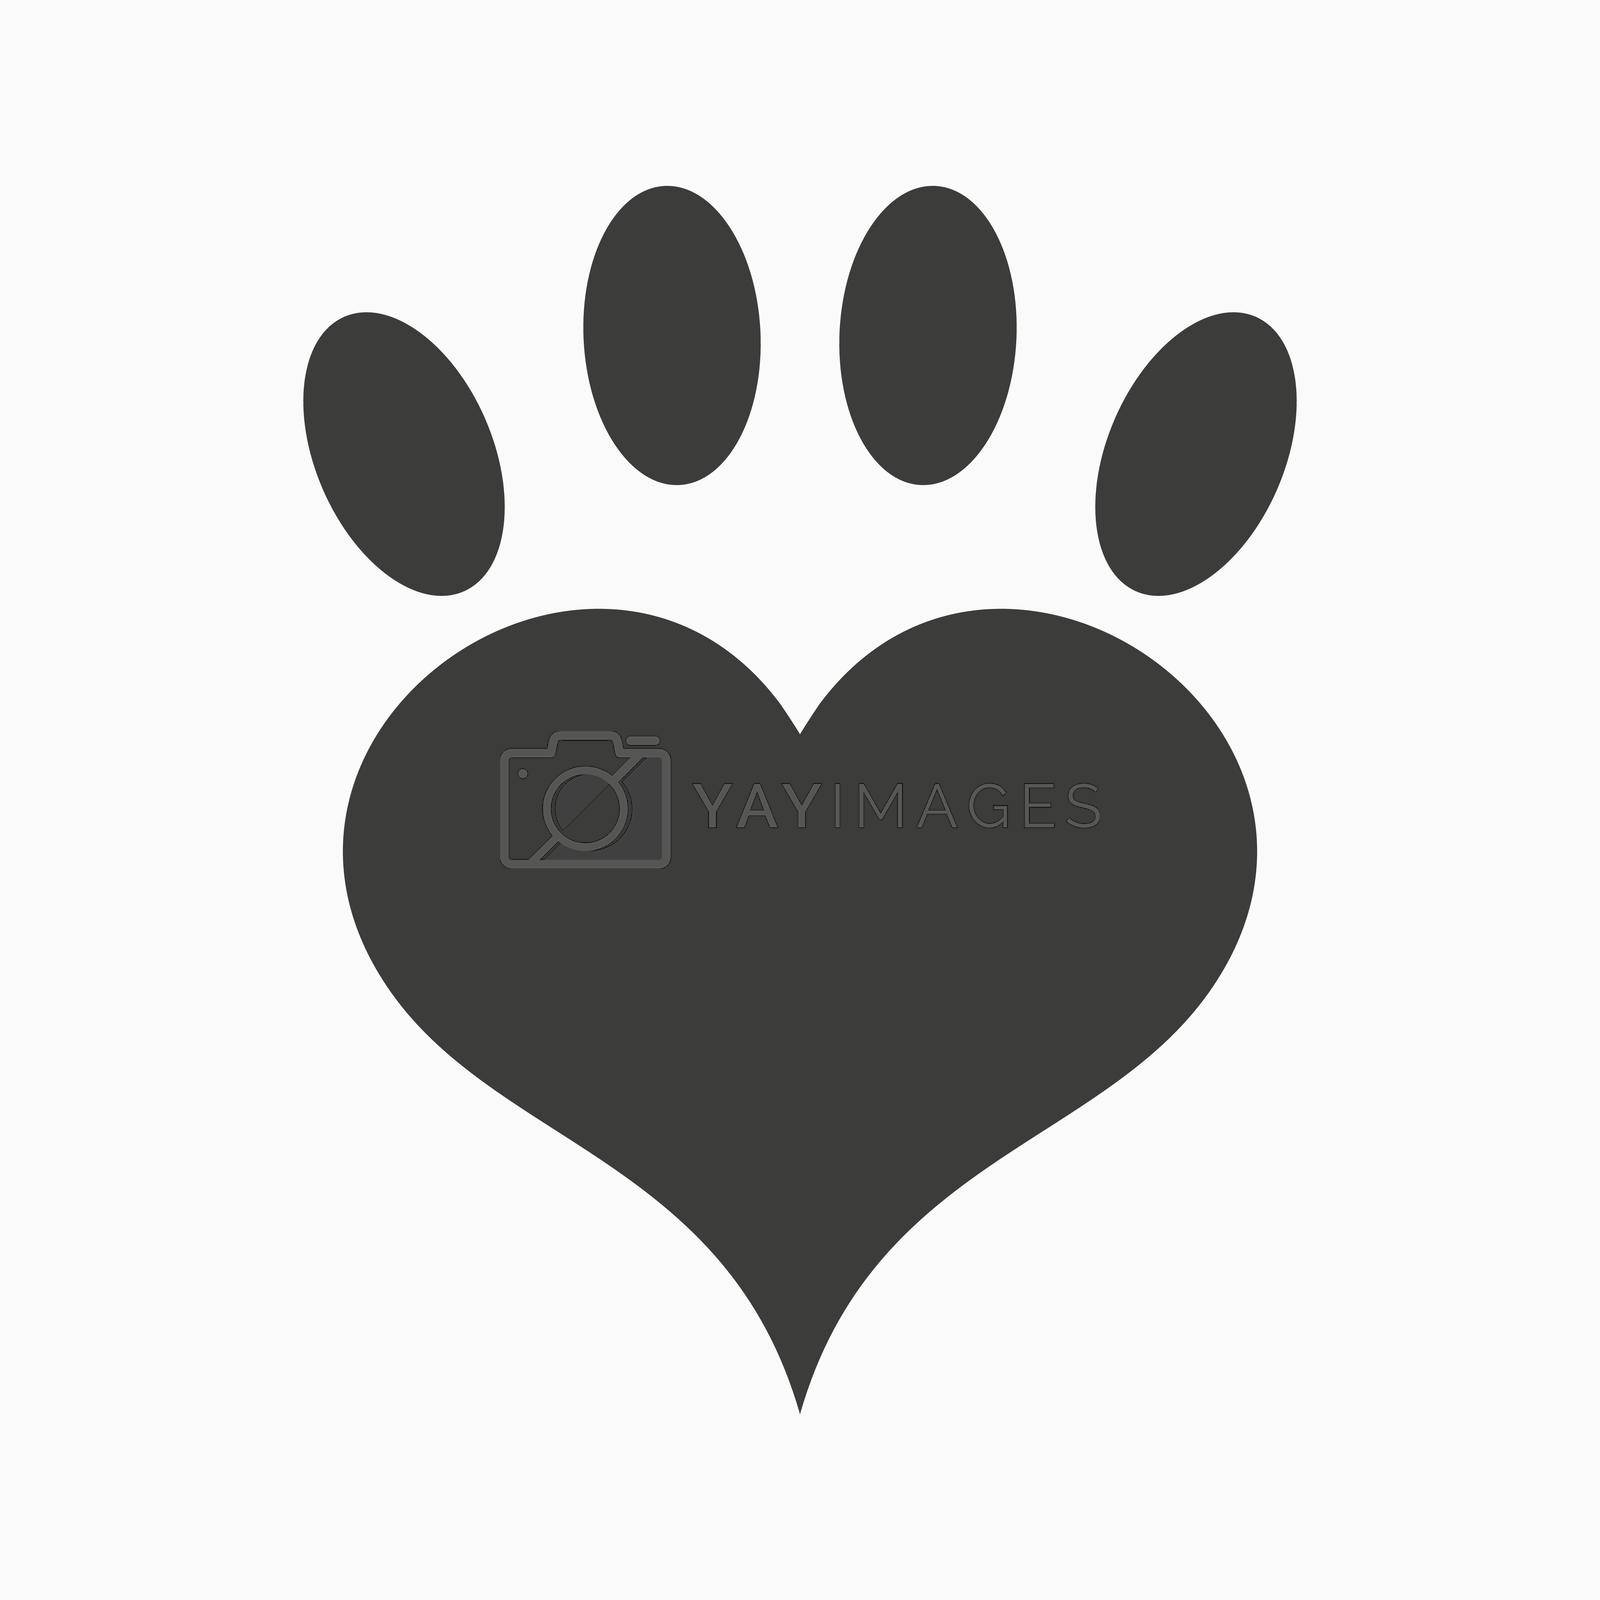 Royalty free image of dog paw with heart, vector illustration by Frutlower